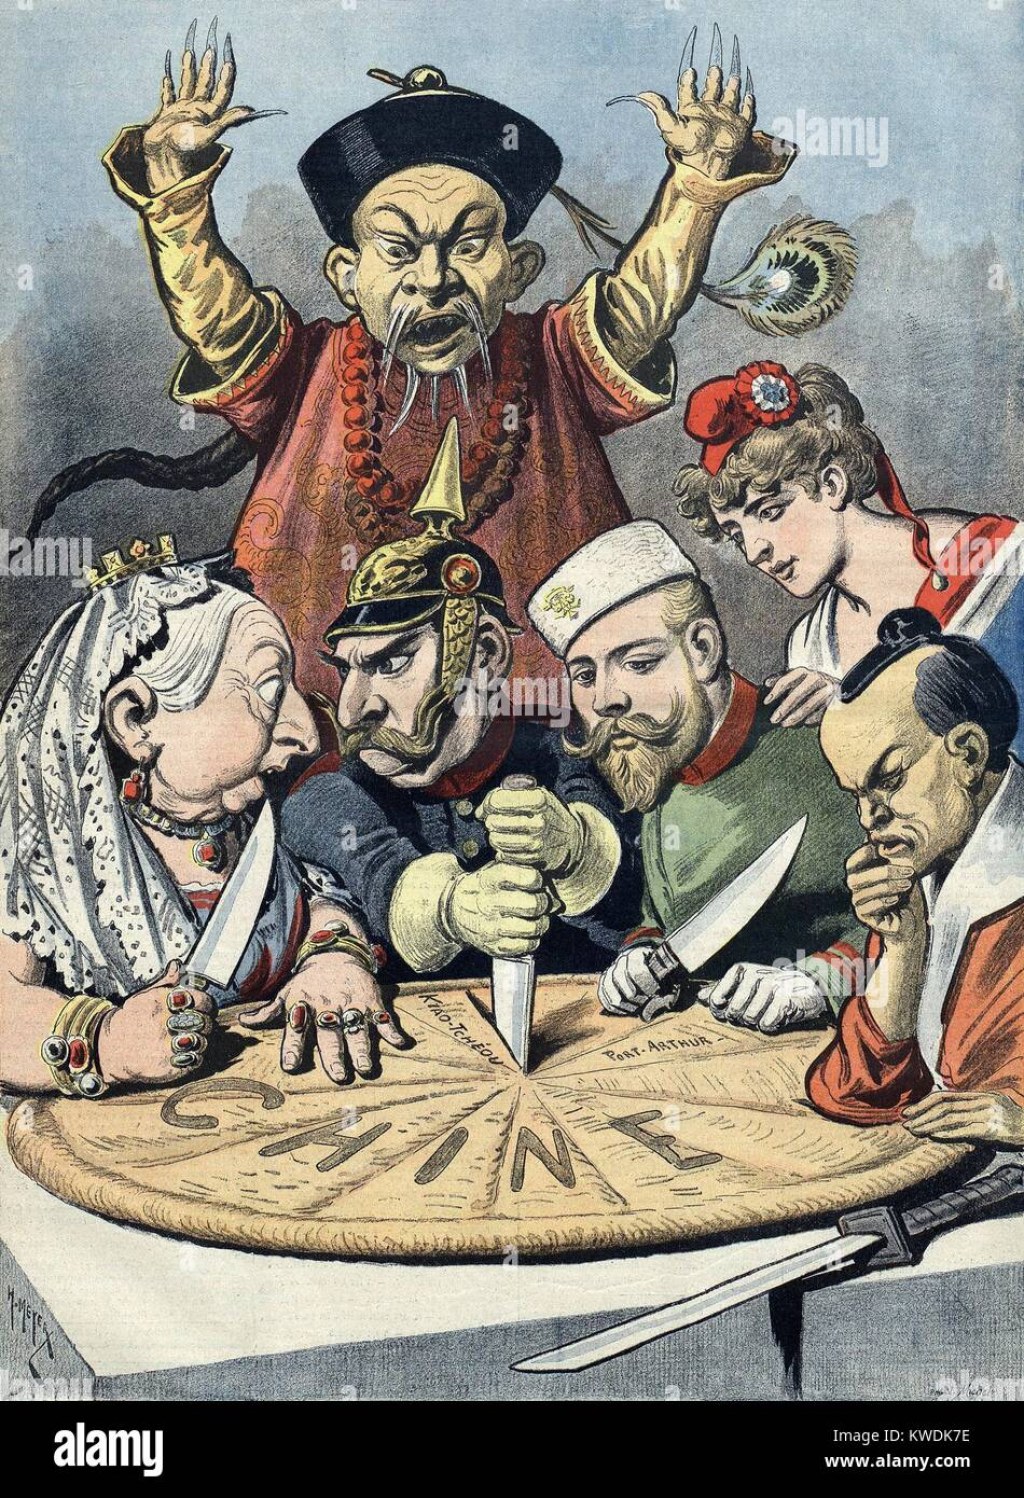 french political cartoon from 1898 - French political cartoon shows Europeans carving up China